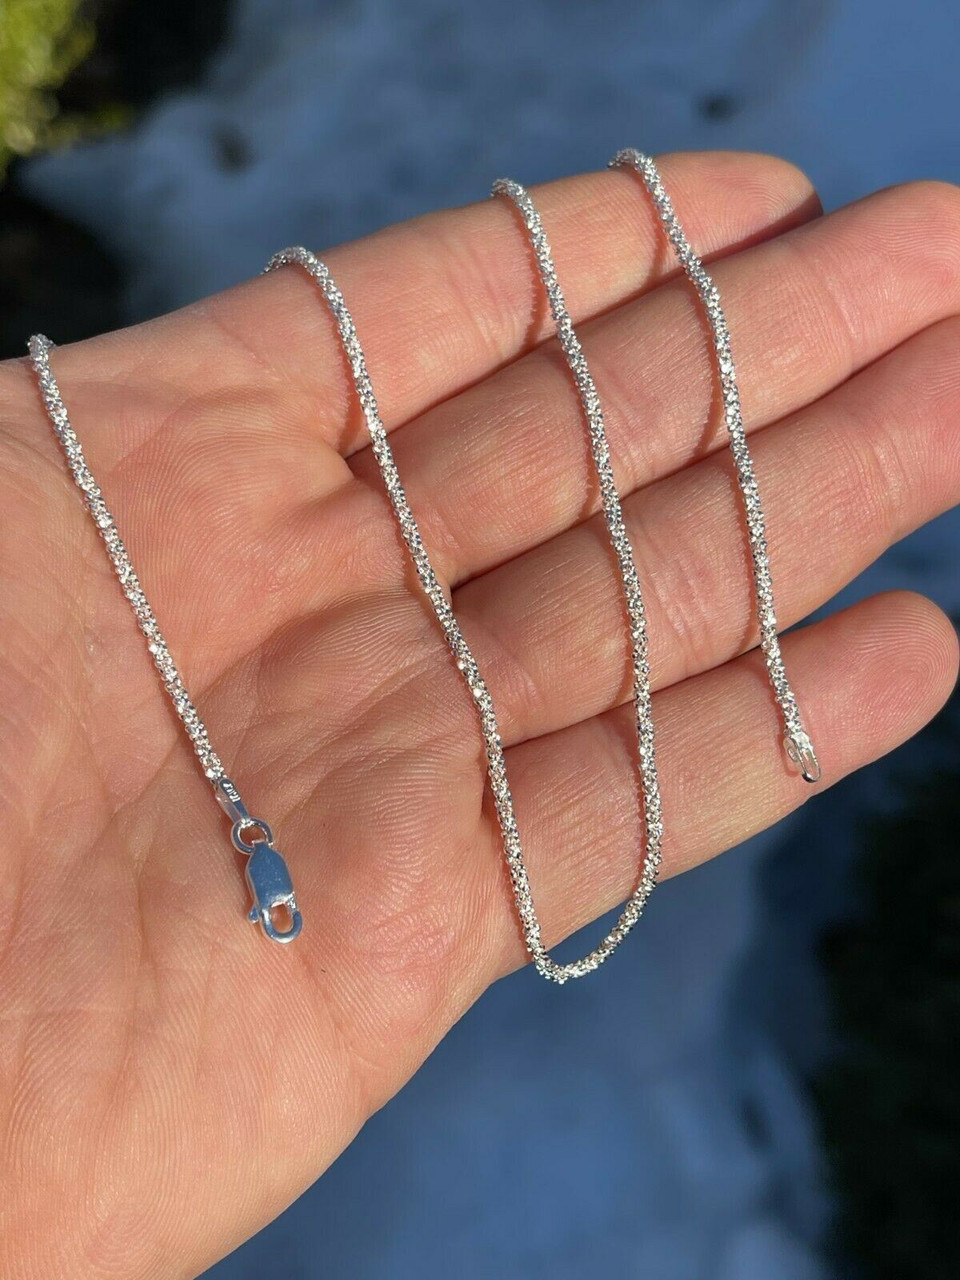 Rope Chain Necklace Sterling Silver Diamond Cut White Gold Look